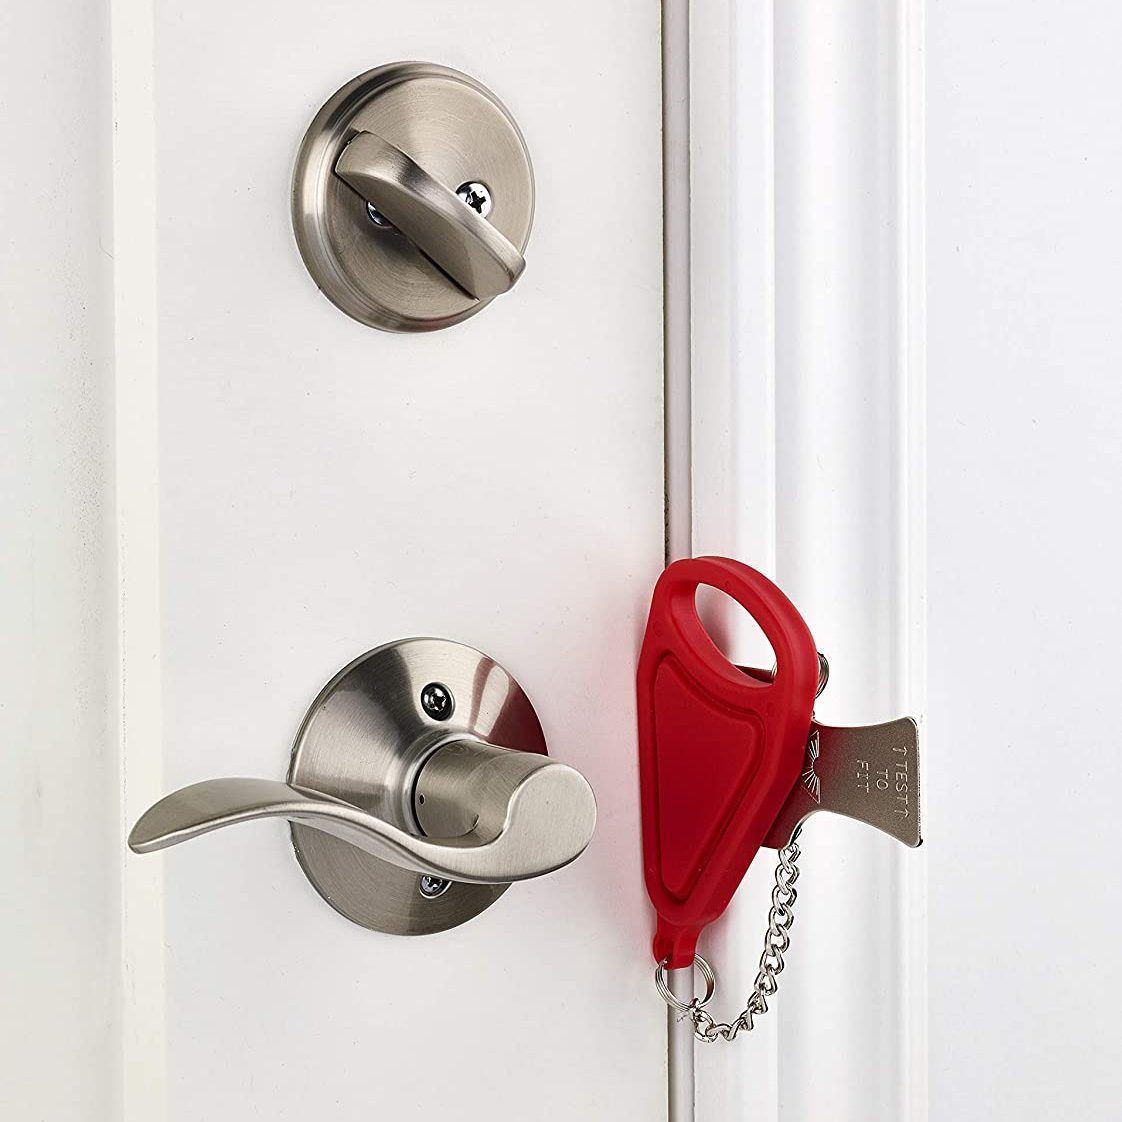 Child-proofing doors in your home with an easy-to-install flip lock